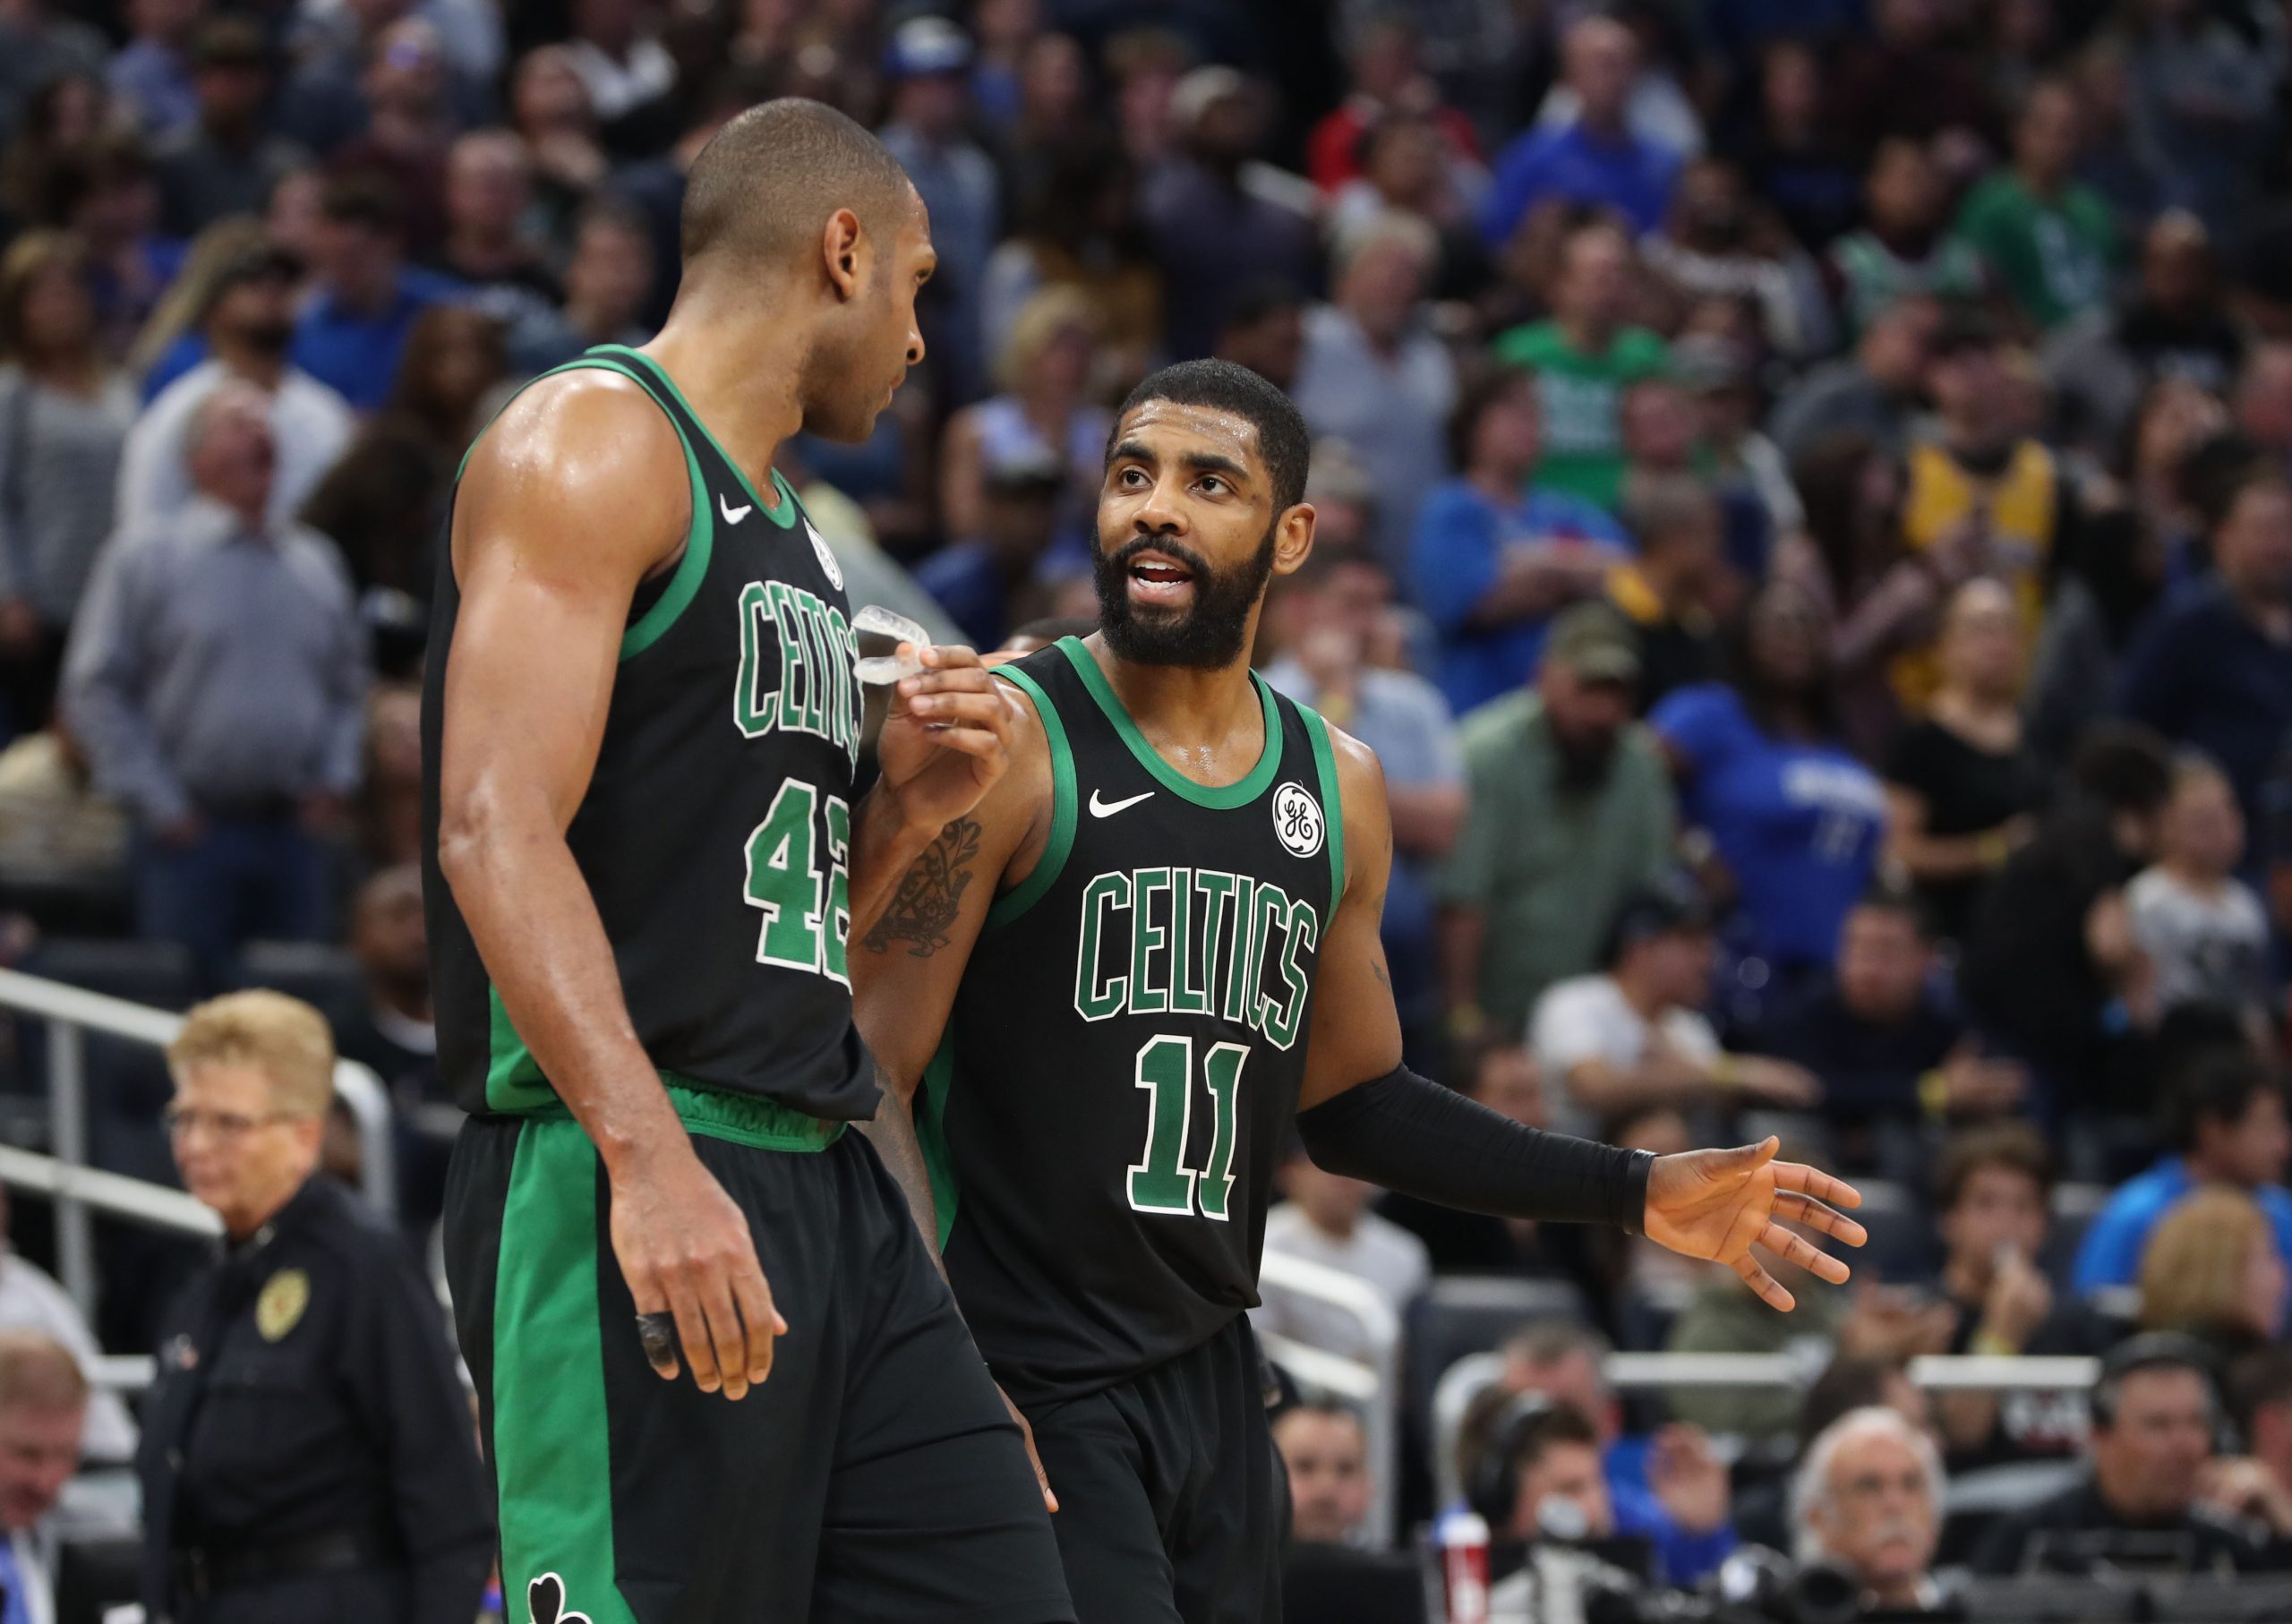 Kyrie Irving rips young Celtics teammates after loss - The Sports Daily